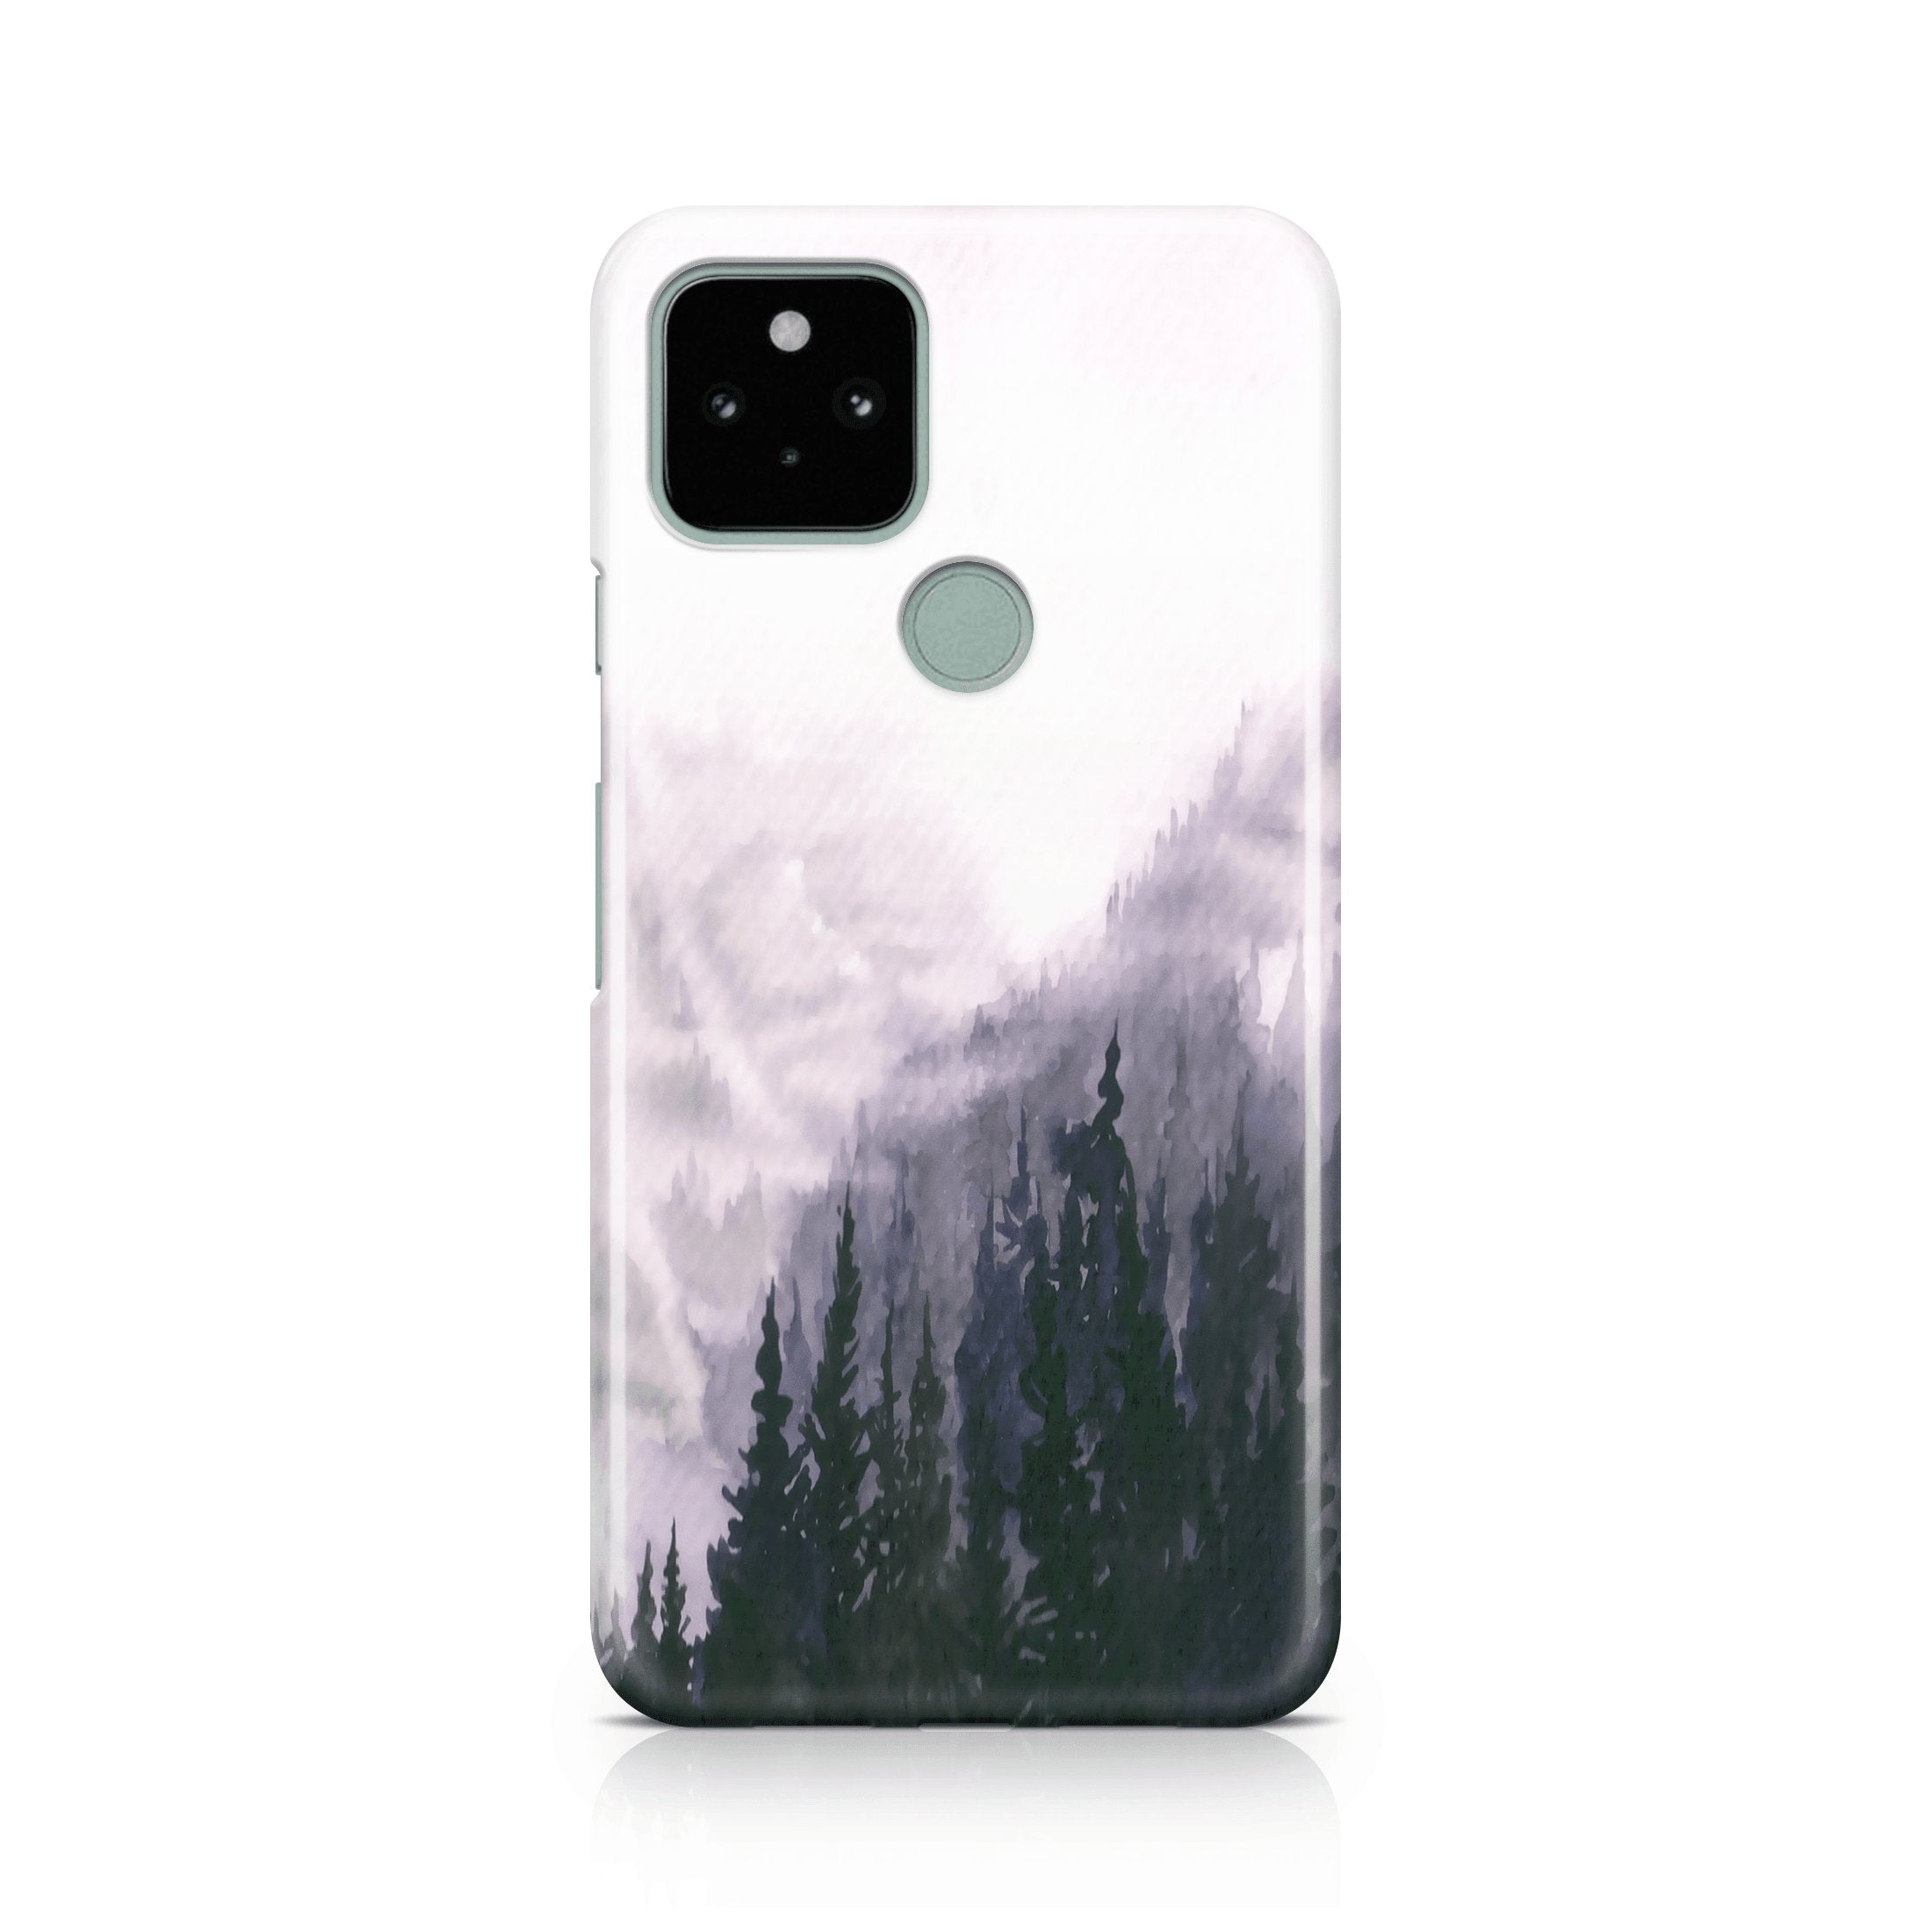 Foggy Morning - Google phone case designs by CaseSwagger